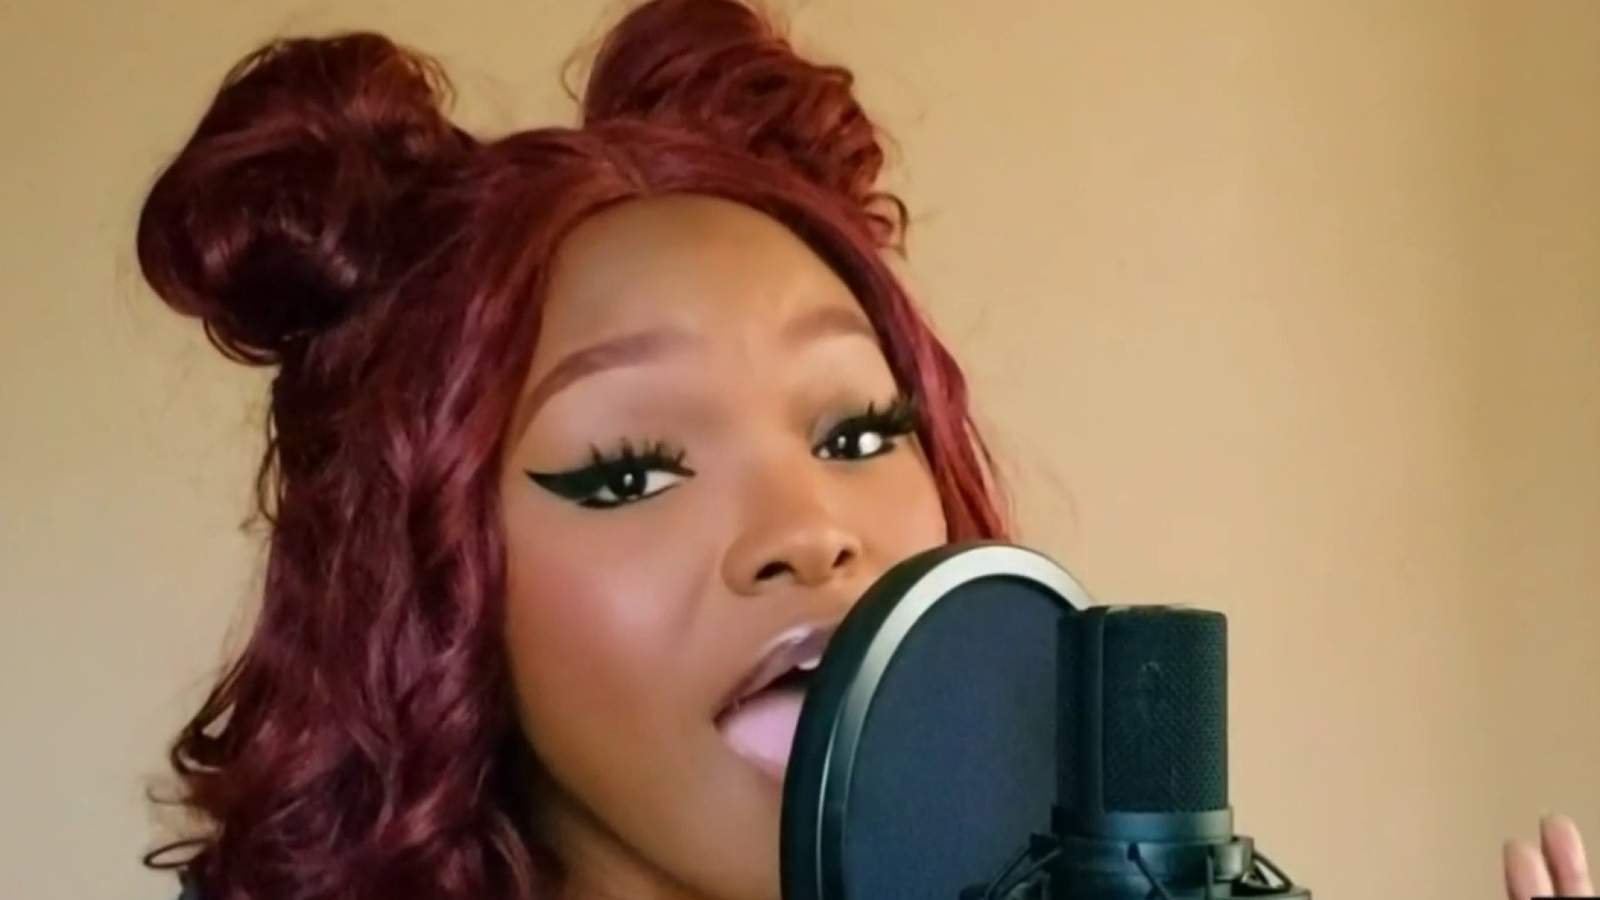 This Katy Perry backup singer is making a name for herself